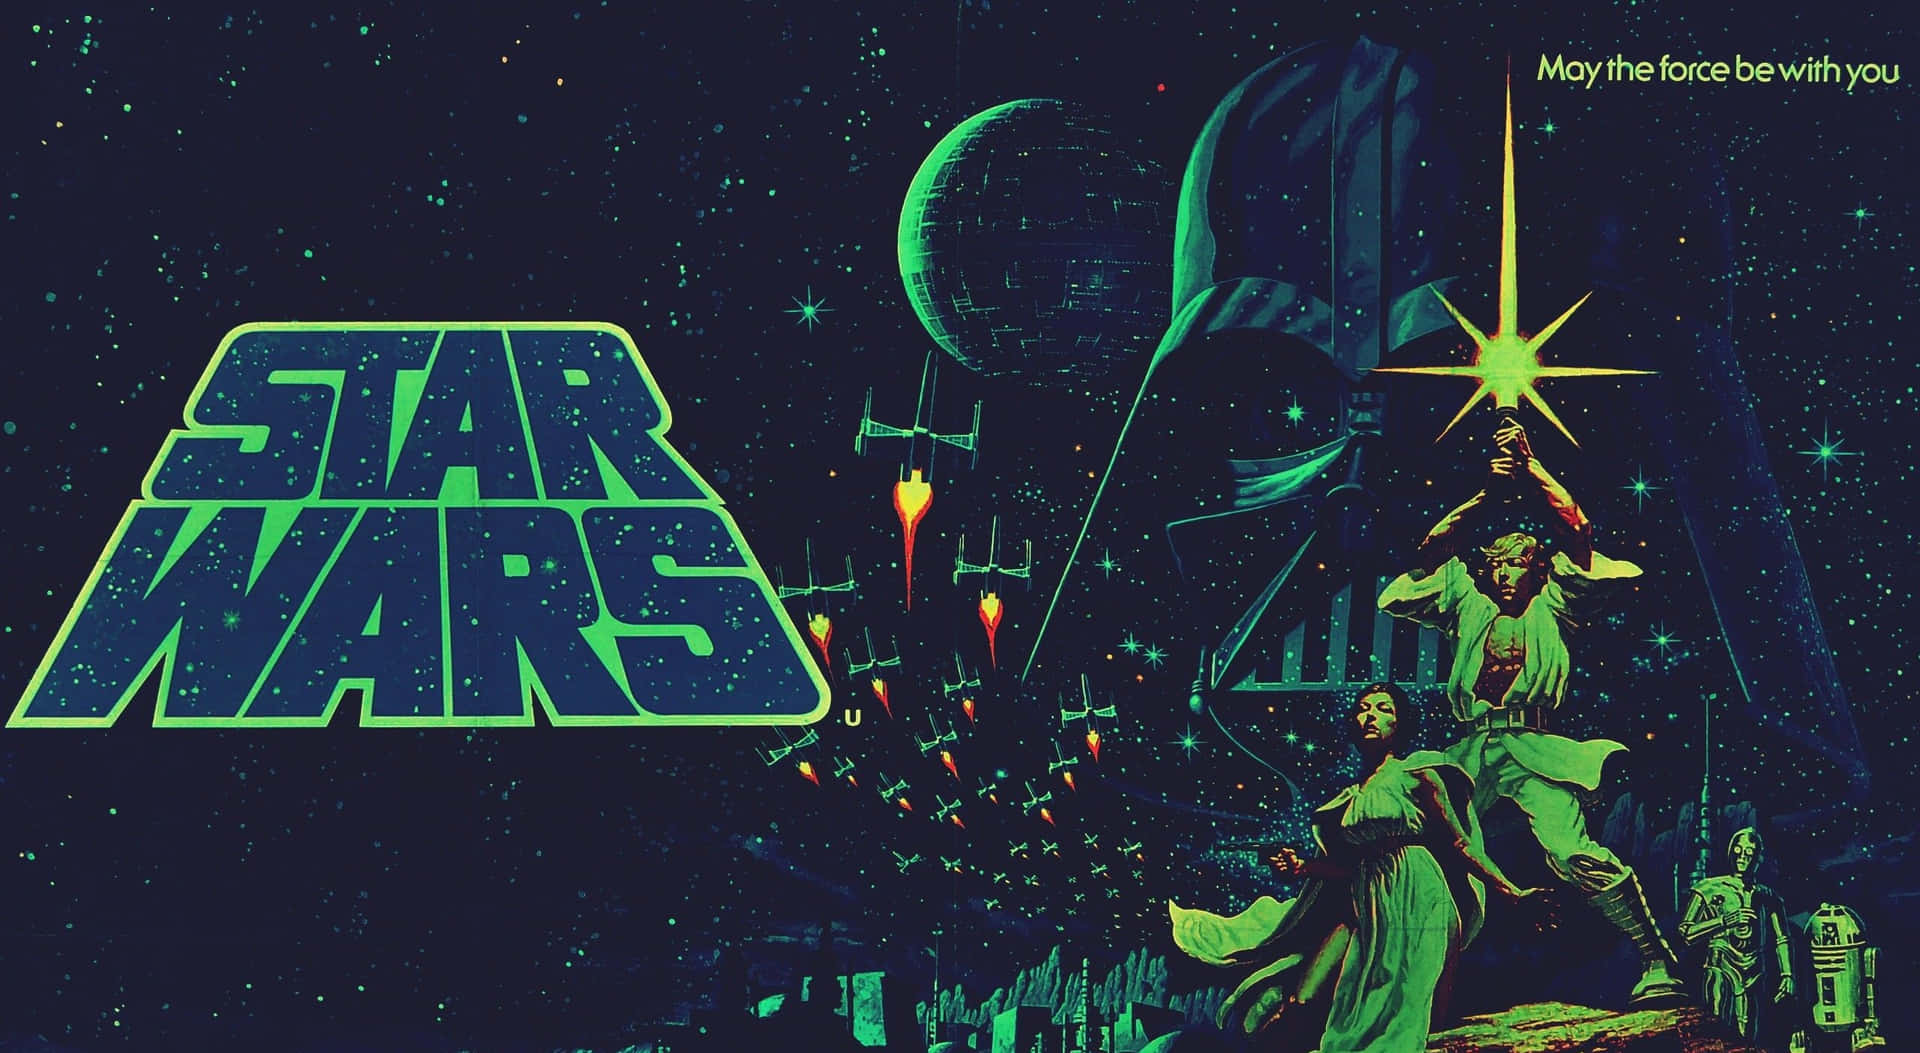 May the Force Be With You - Star Wars Wallpaper Wallpaper